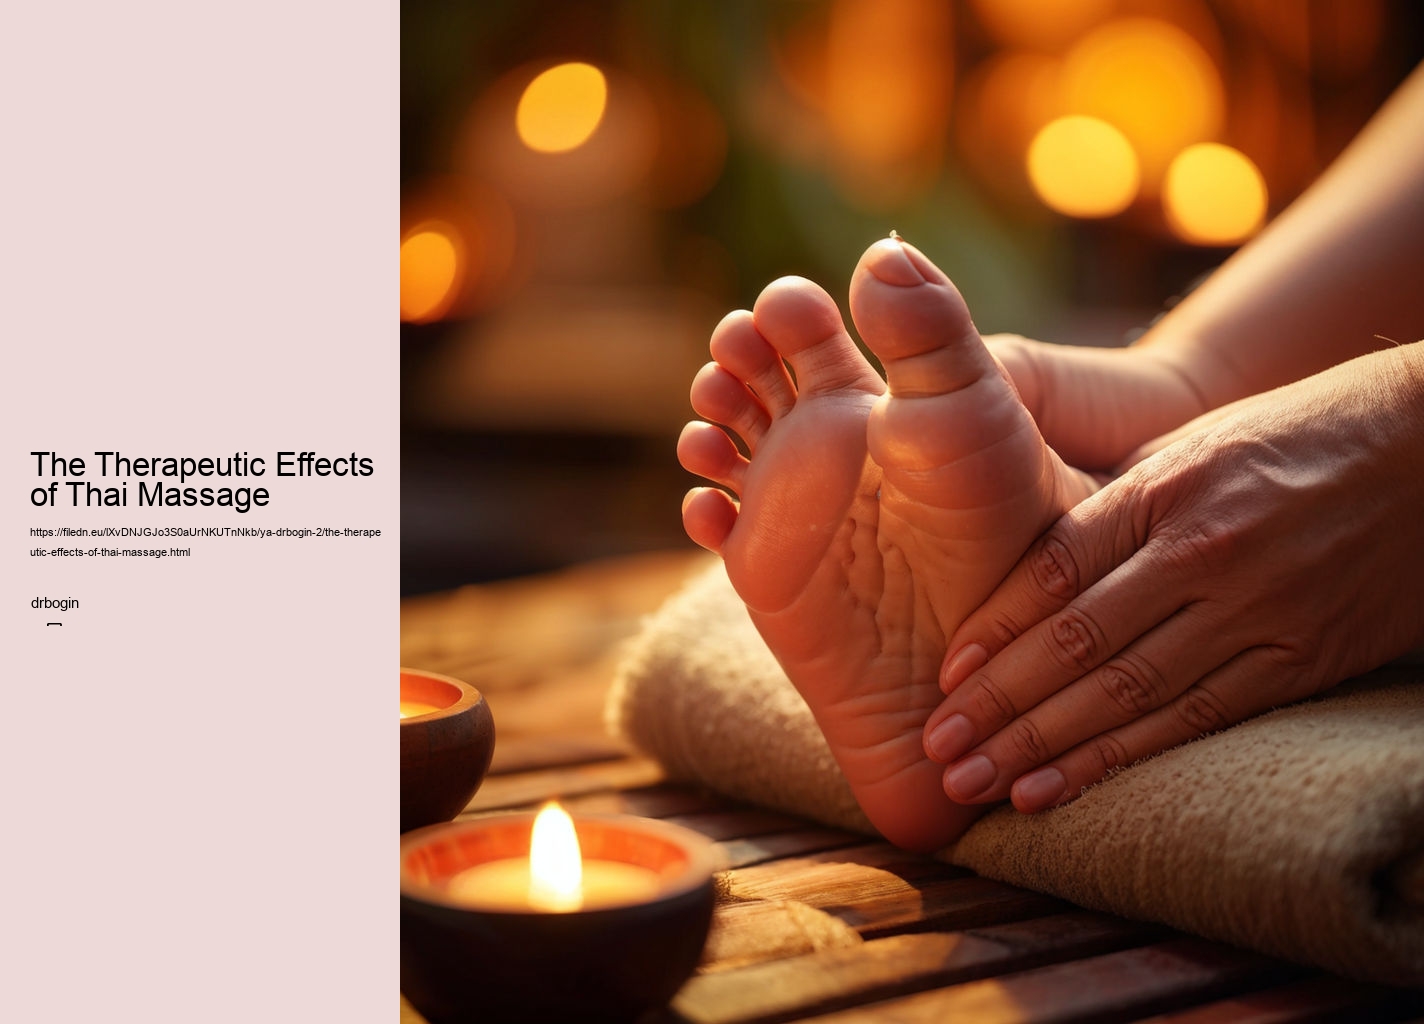 The Therapeutic Effects of Thai Massage